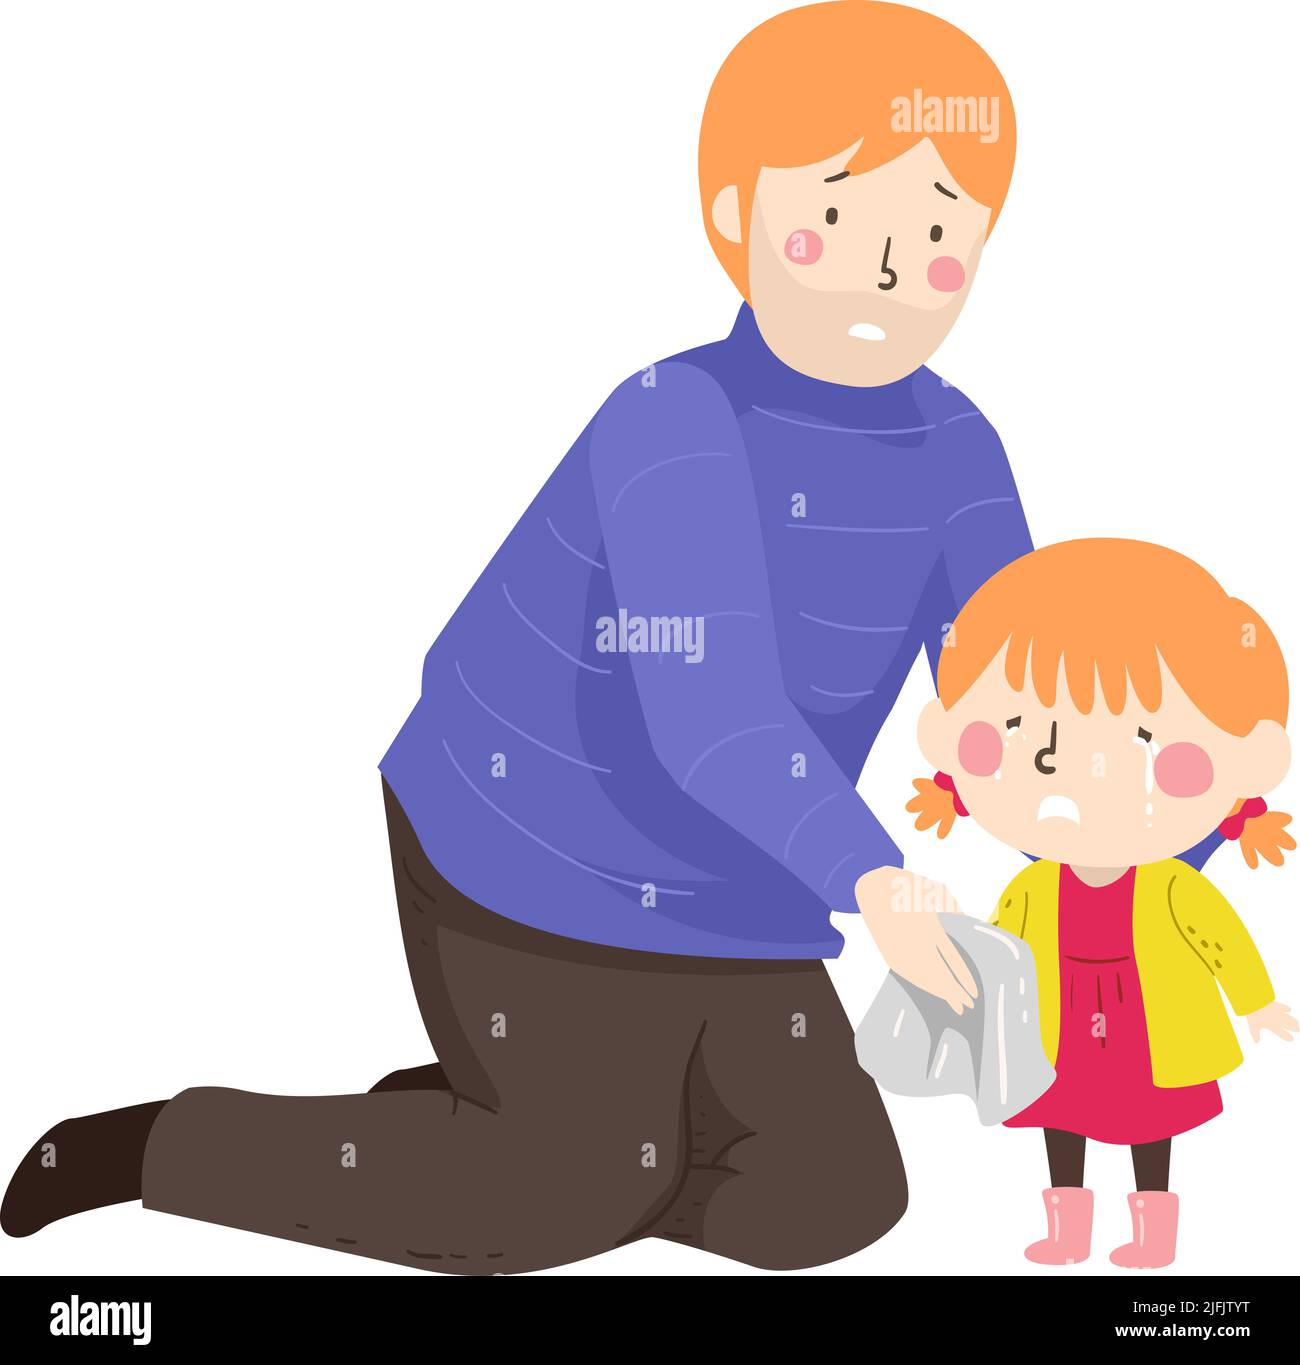 Illustration of Kid Girl Crying with Dad Kneeling to Wipe Her Tears with a Handkerchief Stock Photo